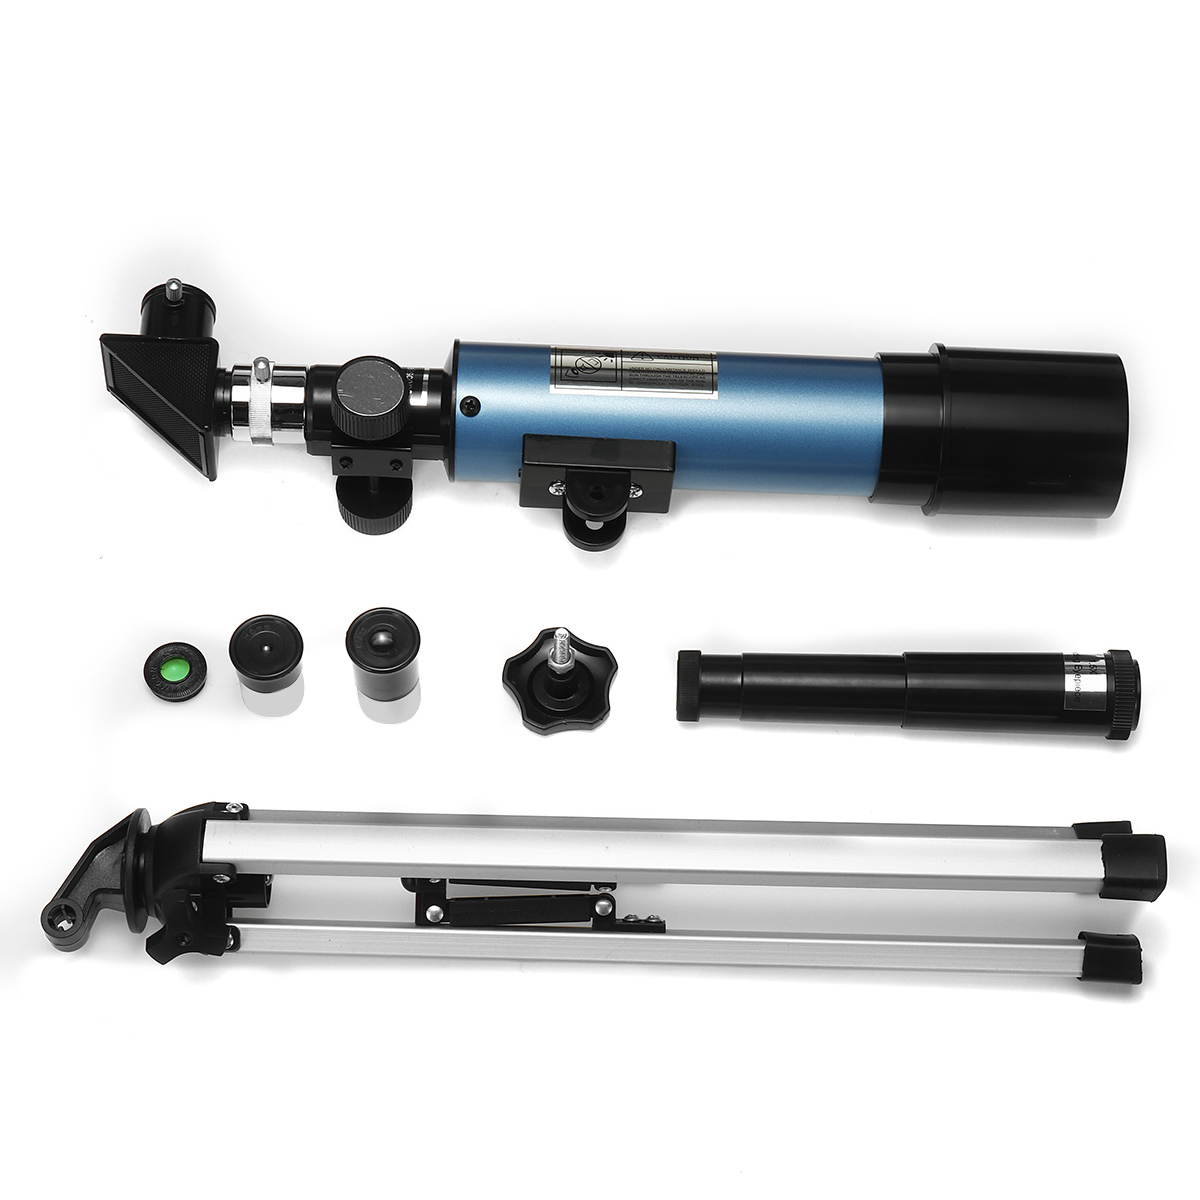 90x-Magnification-Astronomical-Telescope-Clear-Image-with-Remote-Control-and-Camera-Rod-for-Observe--1851121-7